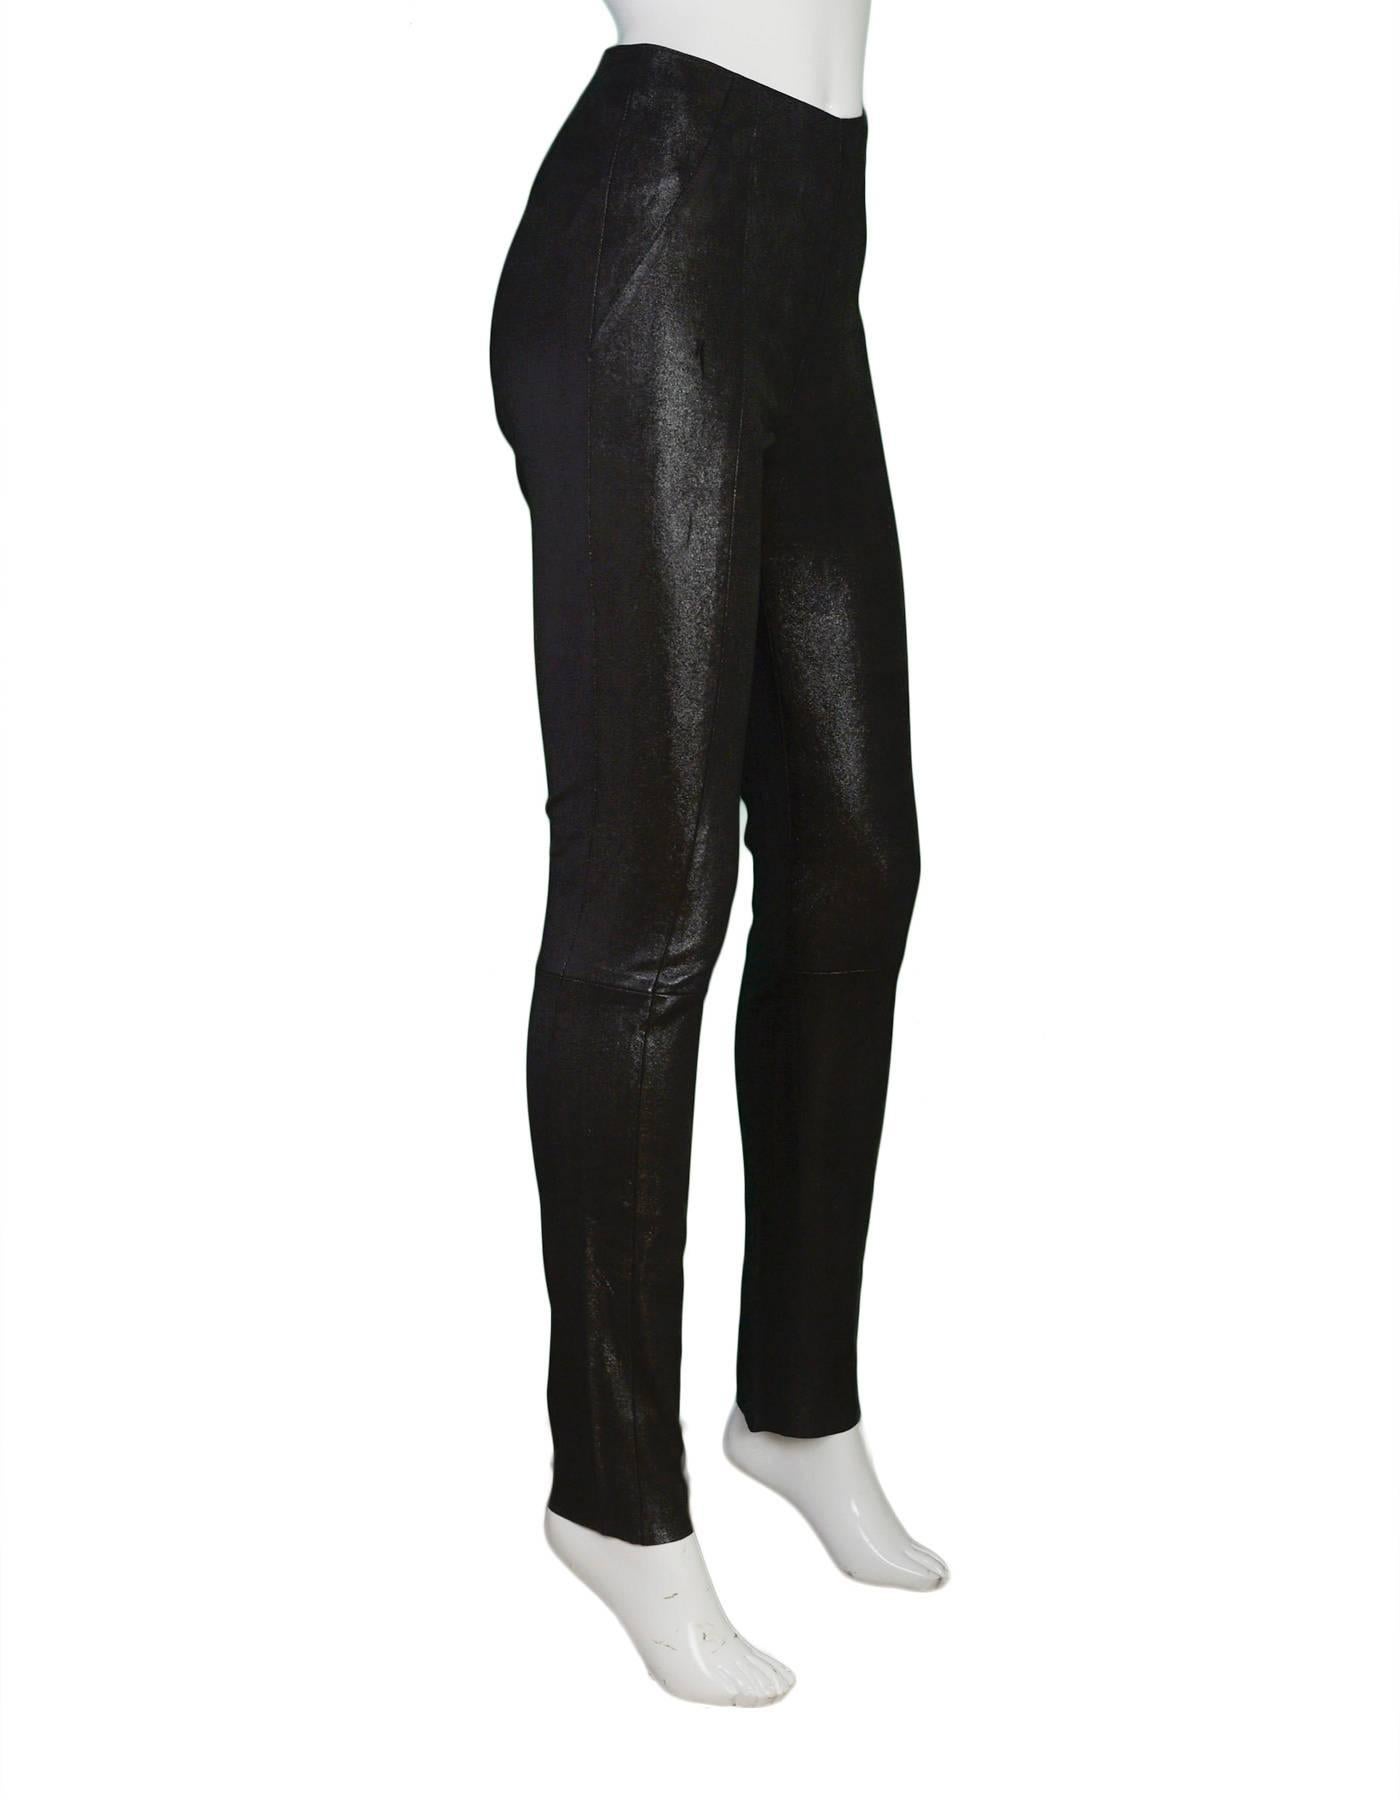 Drome Black Iridescent Skinny Pants 
Features raw edges at pant hemlines

Made In: Italy
Year of Production: 2013-2014
Color: Iridescent black
Composition: 100% leather
Lining: None
Closure/Opening: Hip side zip up
Exterior Pockets: